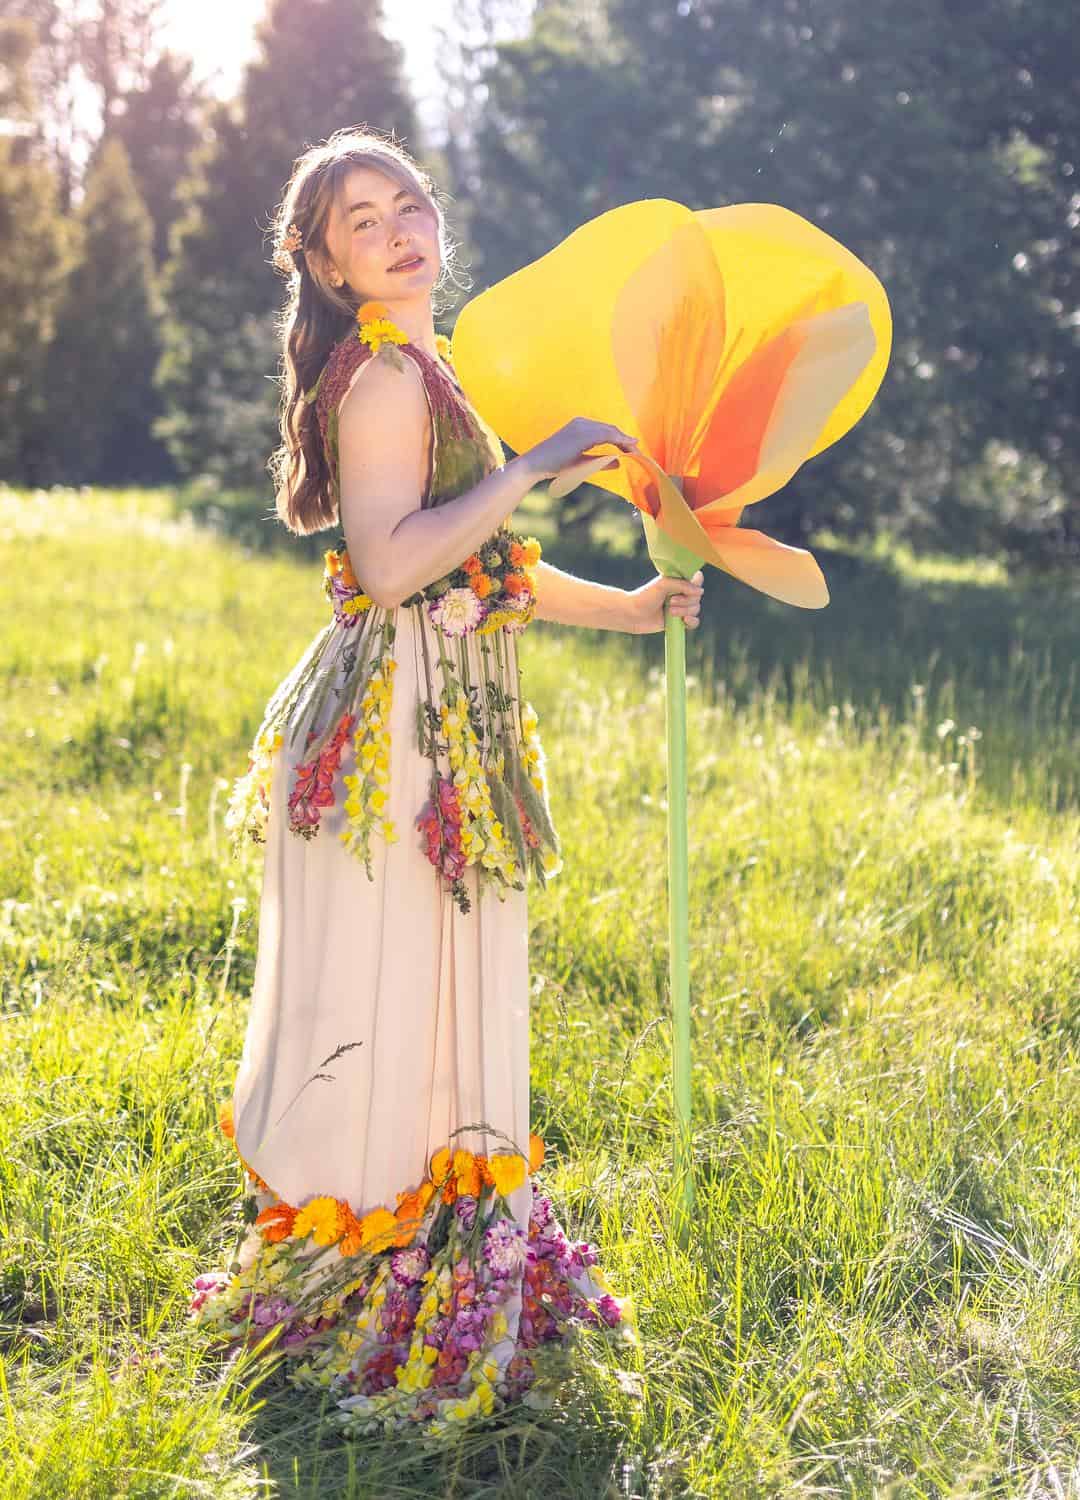 Girl in a dress with an oversized poppy - California's state flower